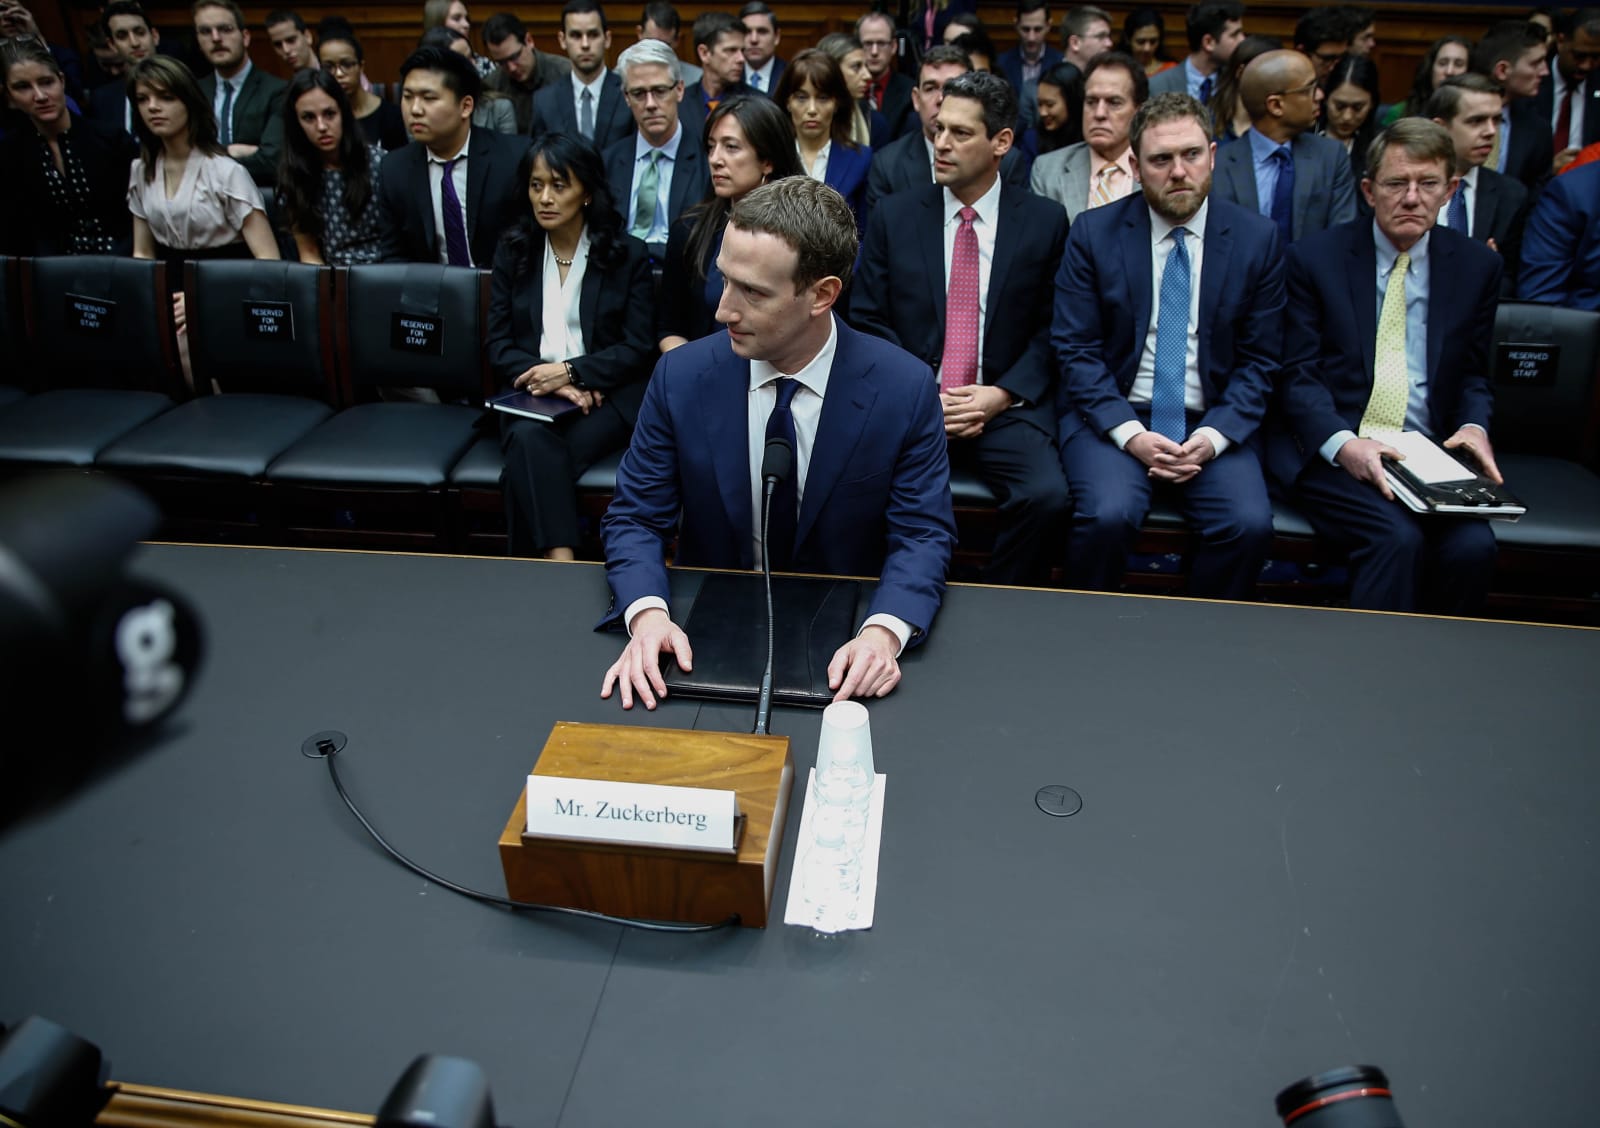 CEO of Facebook Mark Zuckerberg testifies before the House of Representatives House Energy and Commerce Committee